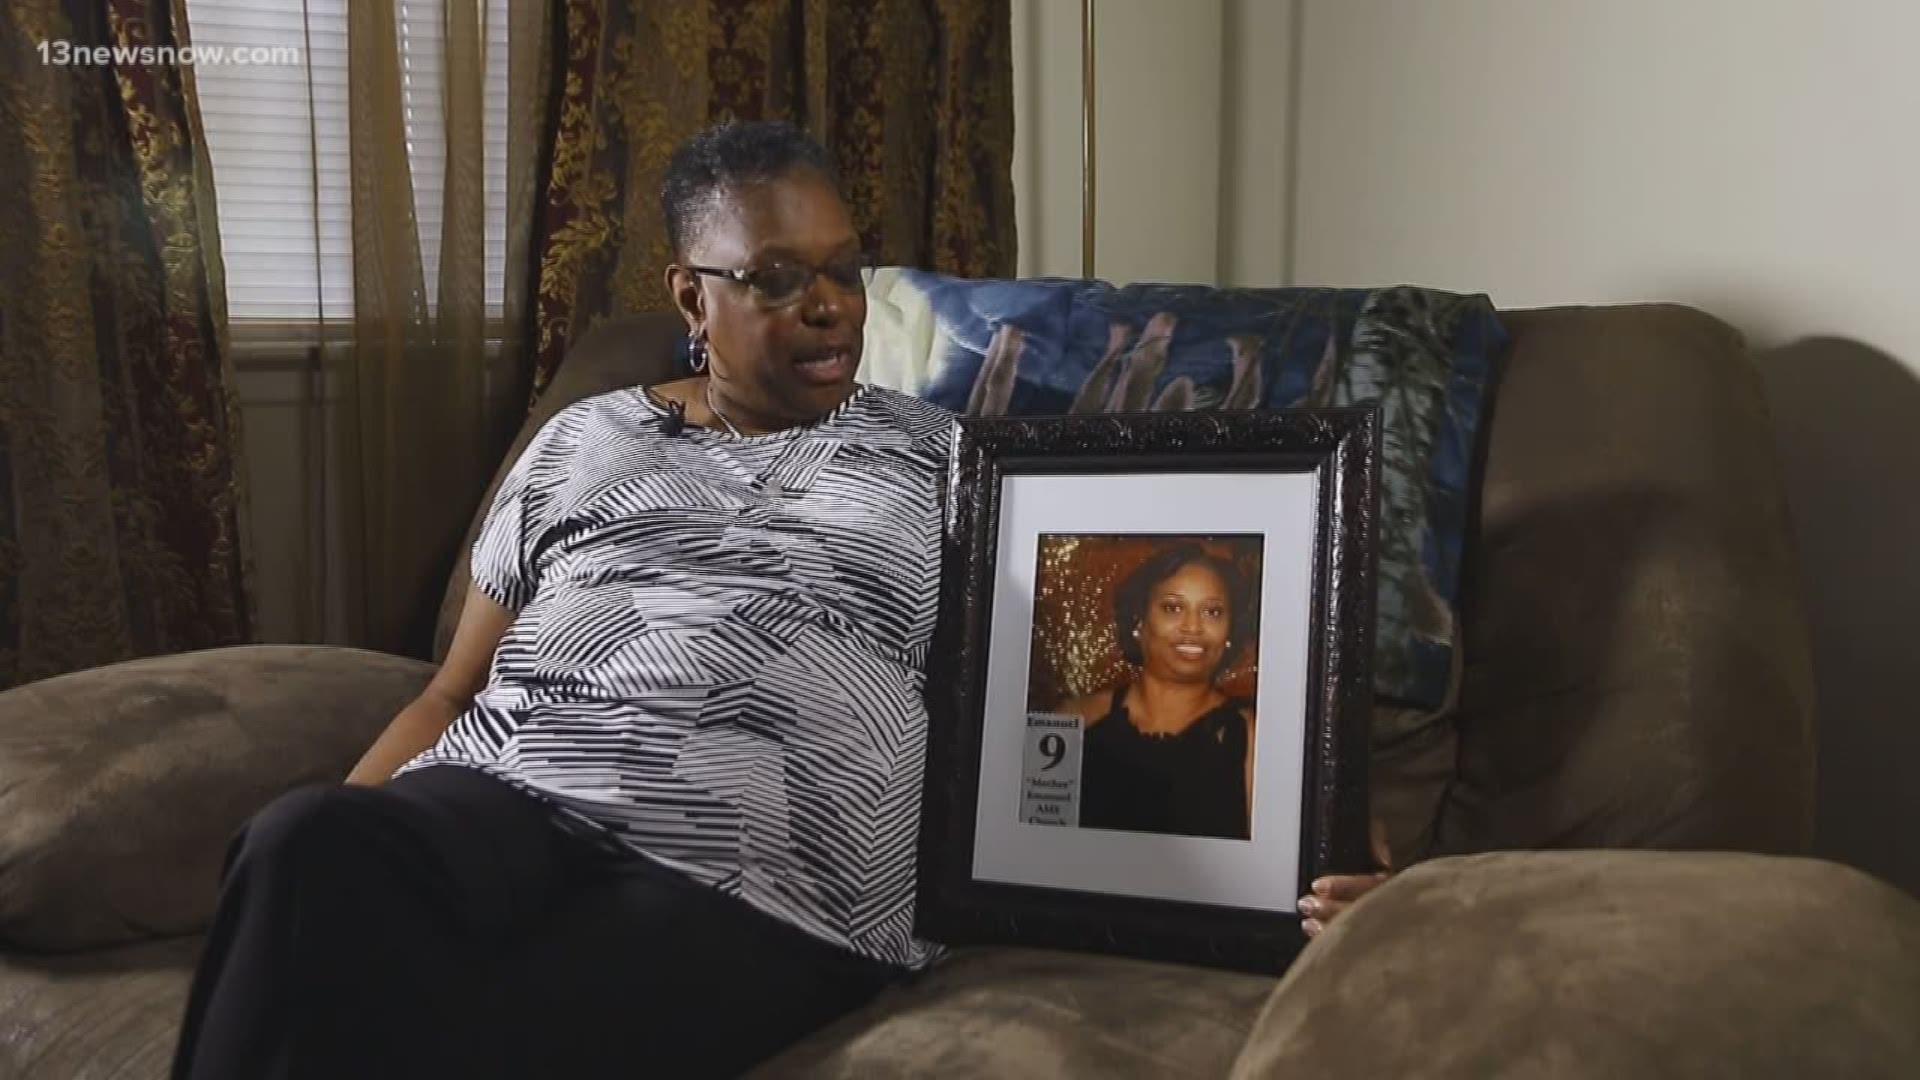 Jackie Jones still remembers the day her family received the call that her sister was one of the victims in the Charleston church shooting. She wants the families of the victims of the Virginia Beach Municipal Center shooting  to know they are not alone and healing is a process.